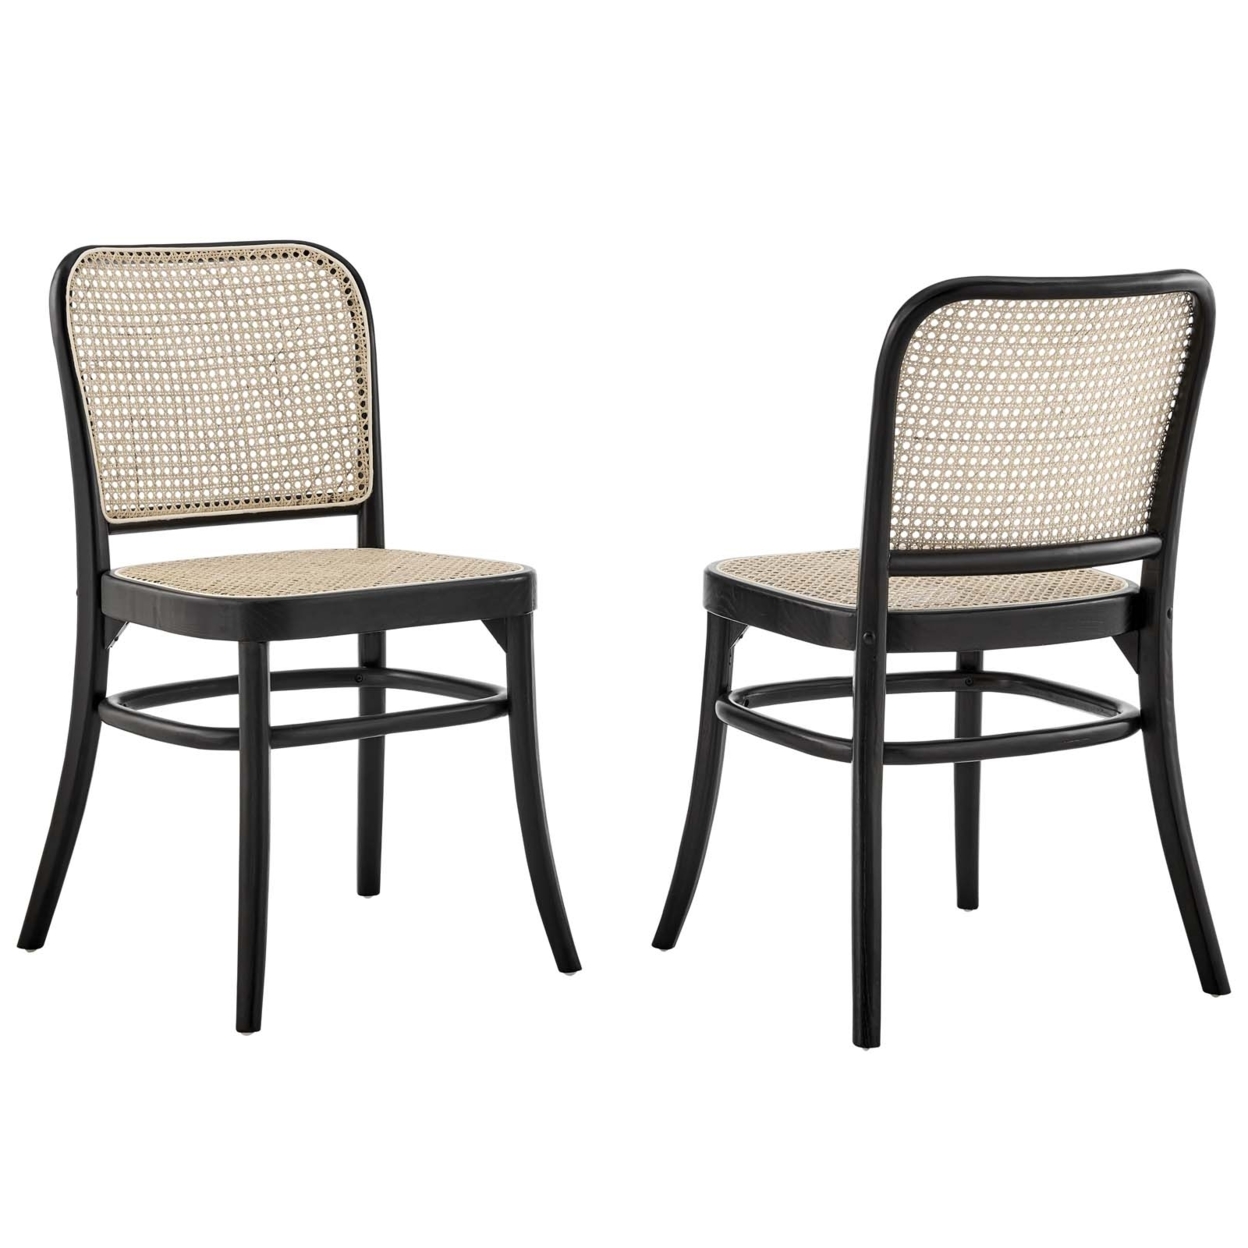 Winona Wood Dining Side Chair Set Of 2, Black